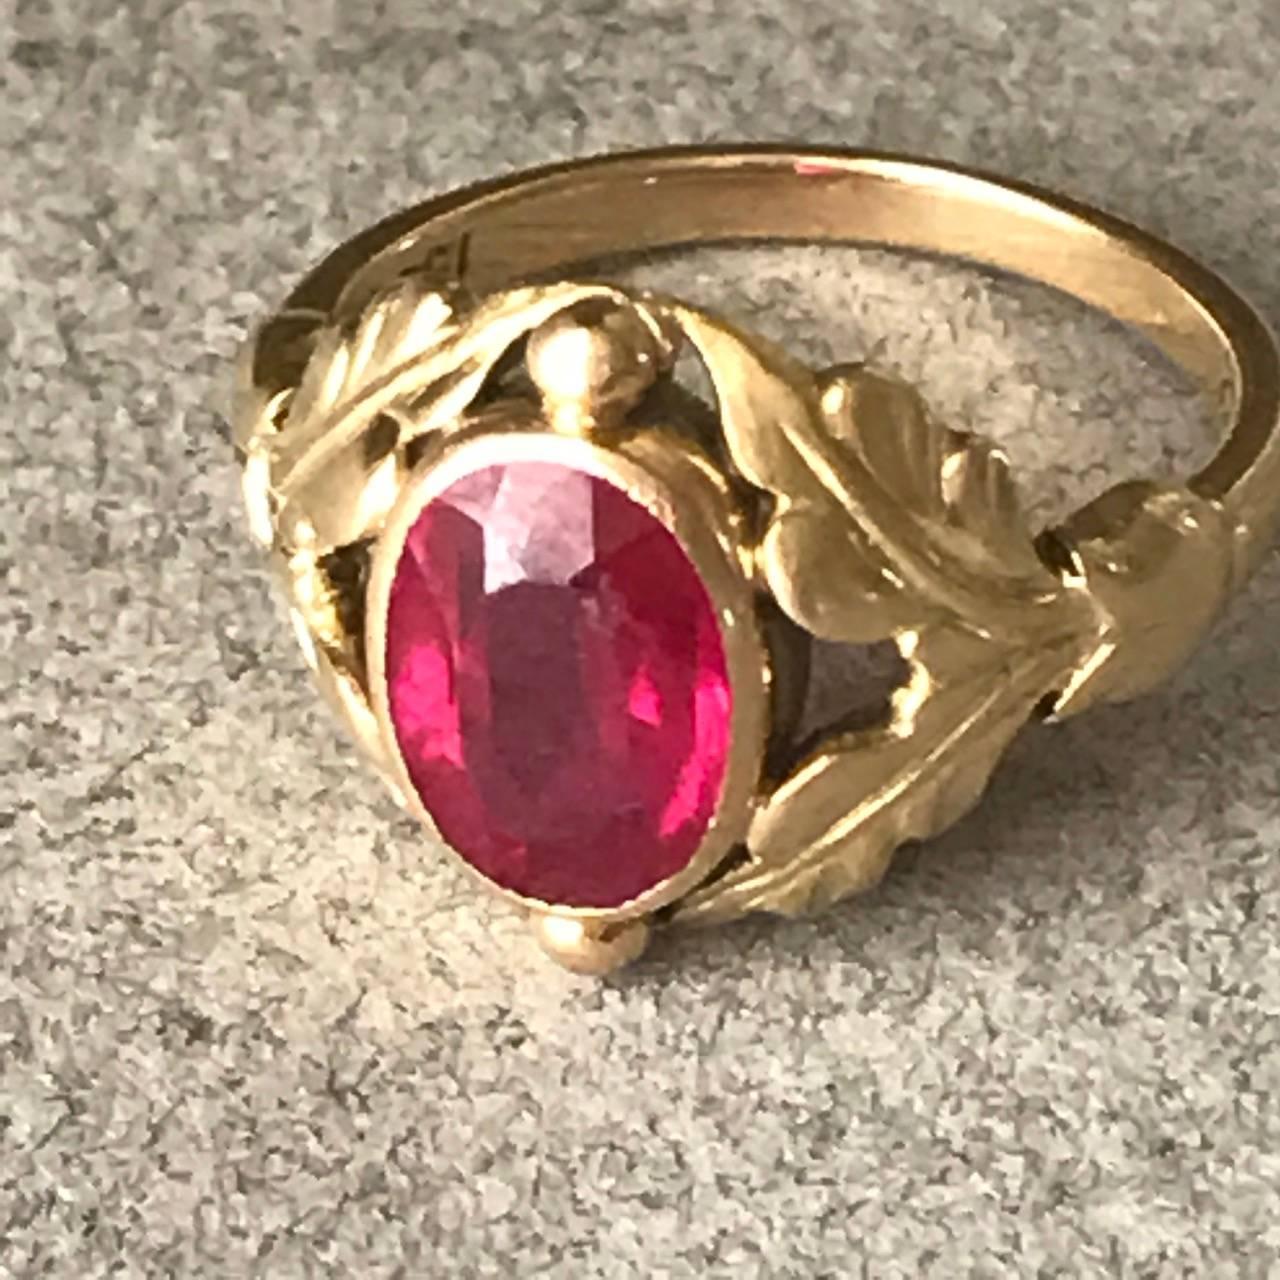 Georg Jensen 18k Gold Ring With Synthetic Ruby No. 208

Delicate Art Nouveau design by Georg Jensen himself. 

Excellent condition 

Complimentary gift box and FREE shipping included.